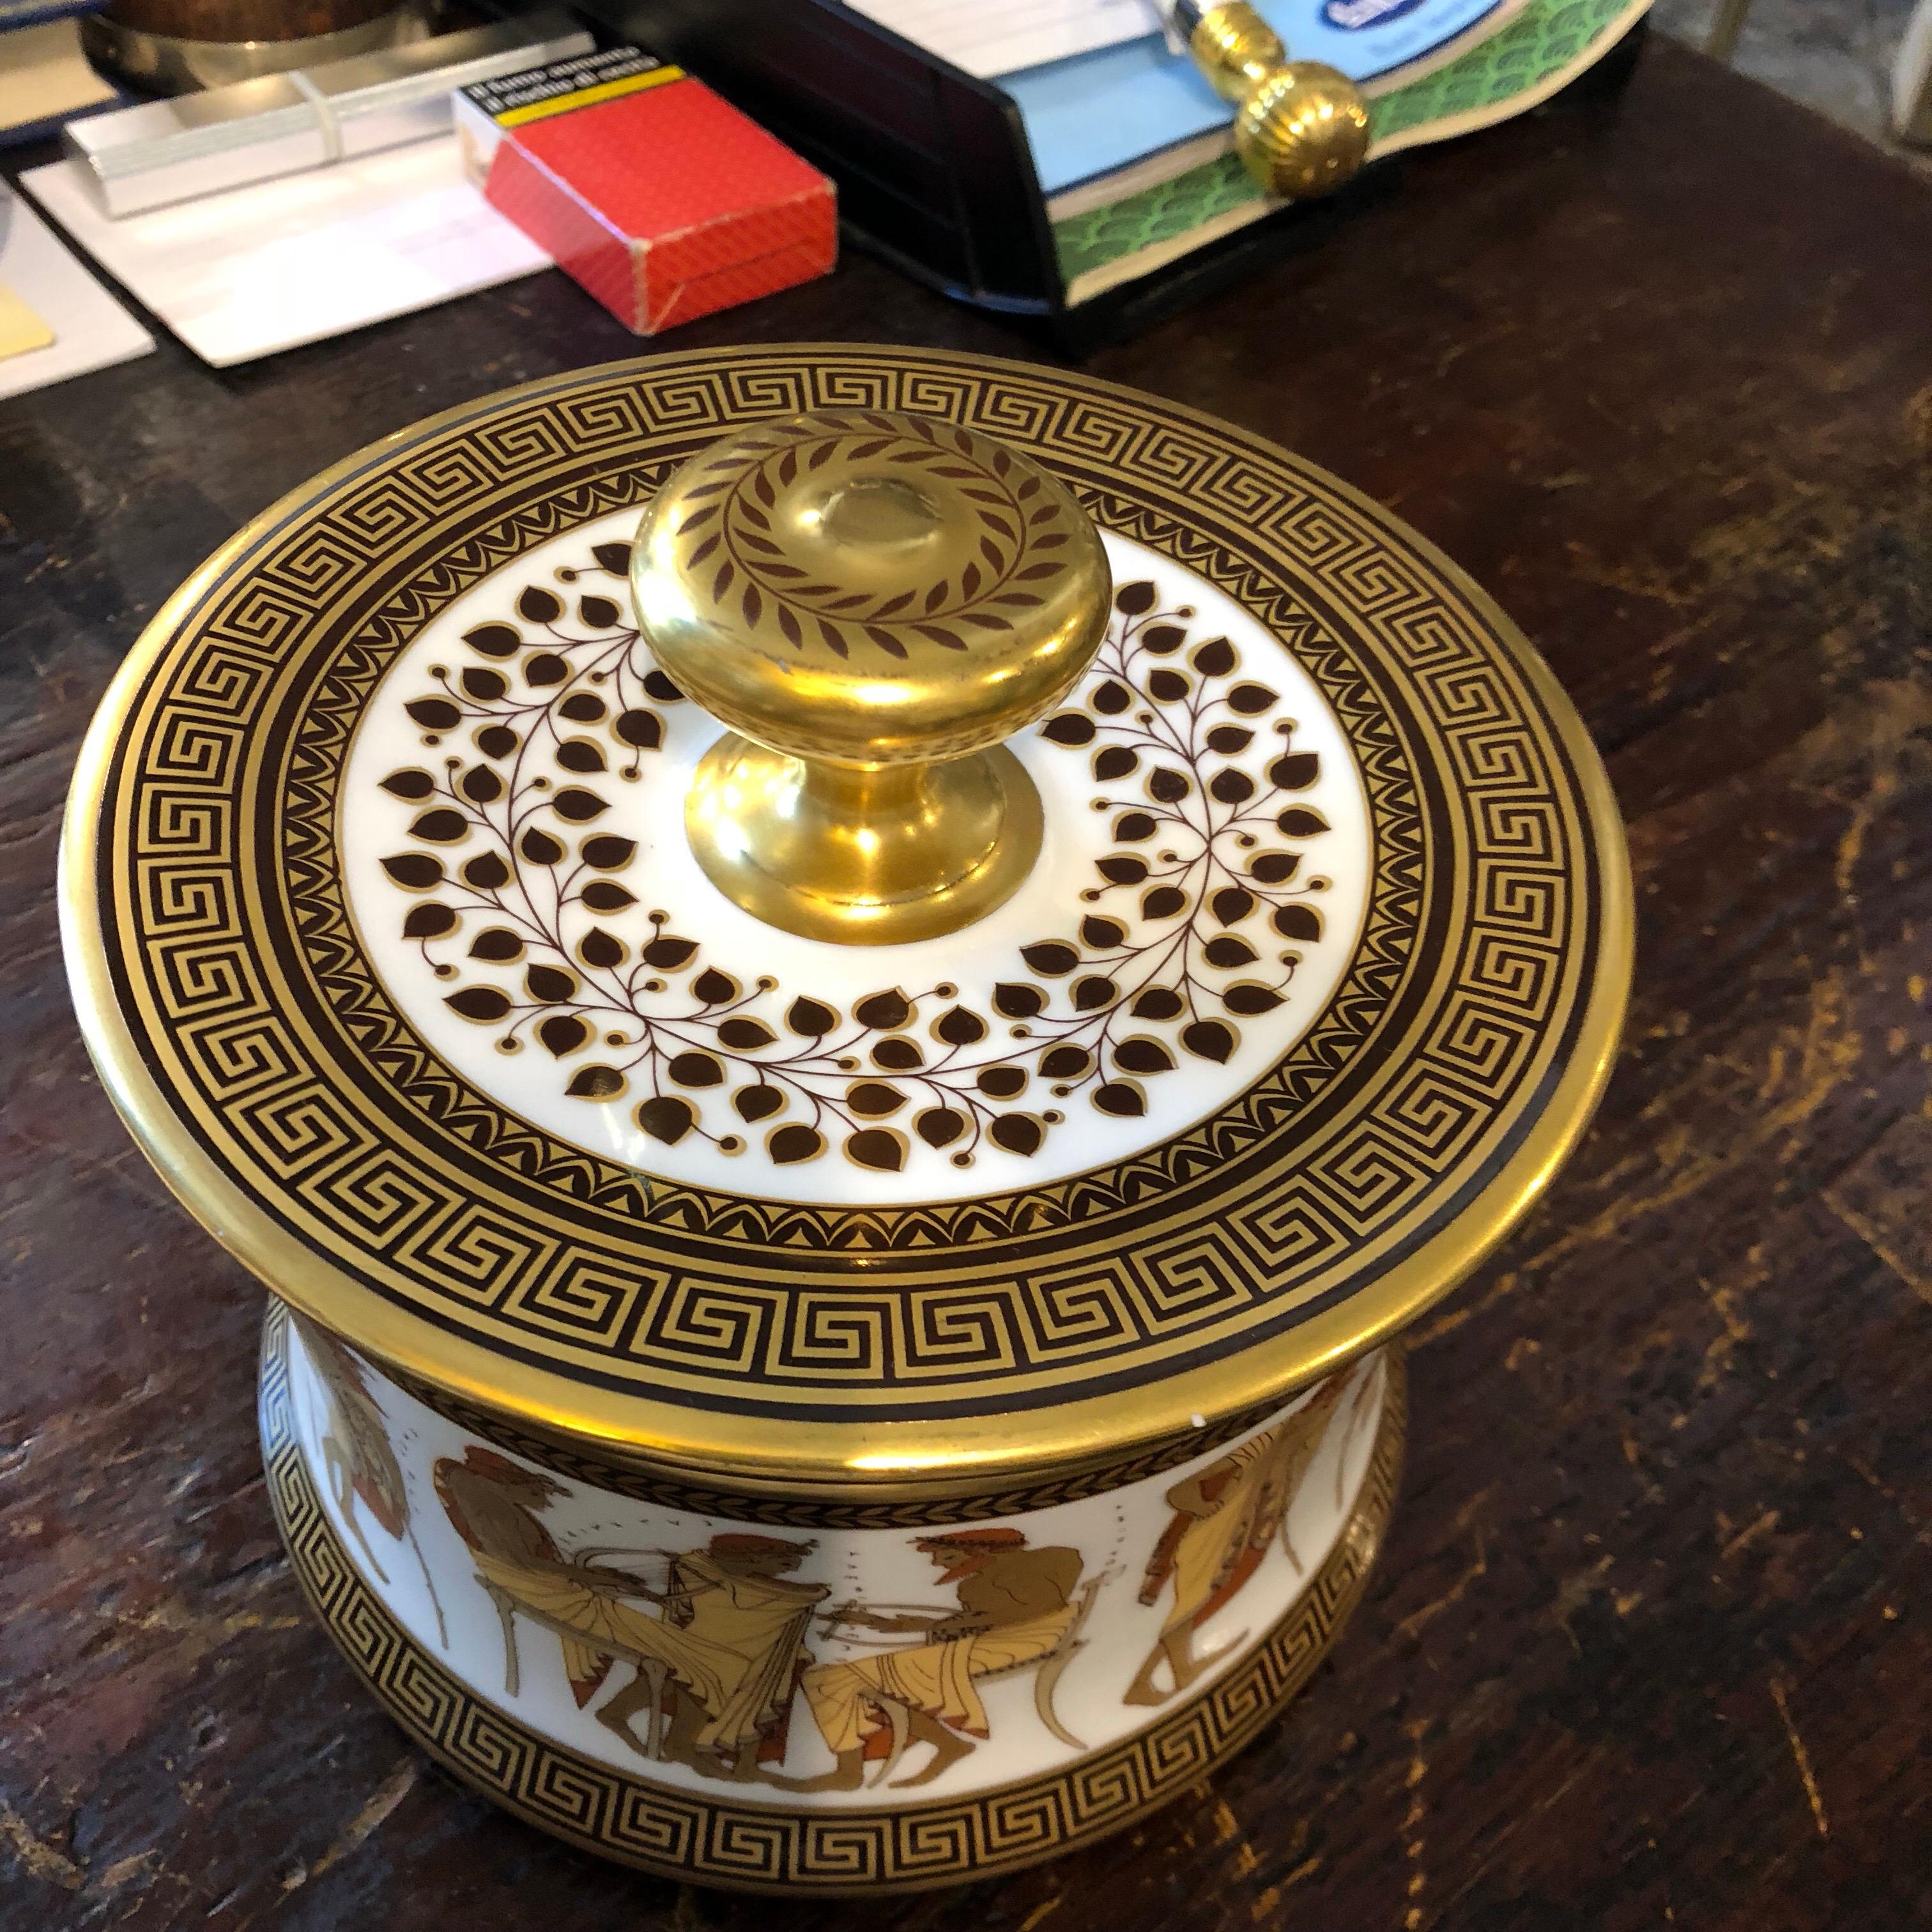 An amazing hand-painted biscuit box, pure gold finishes, very good conditions overall.